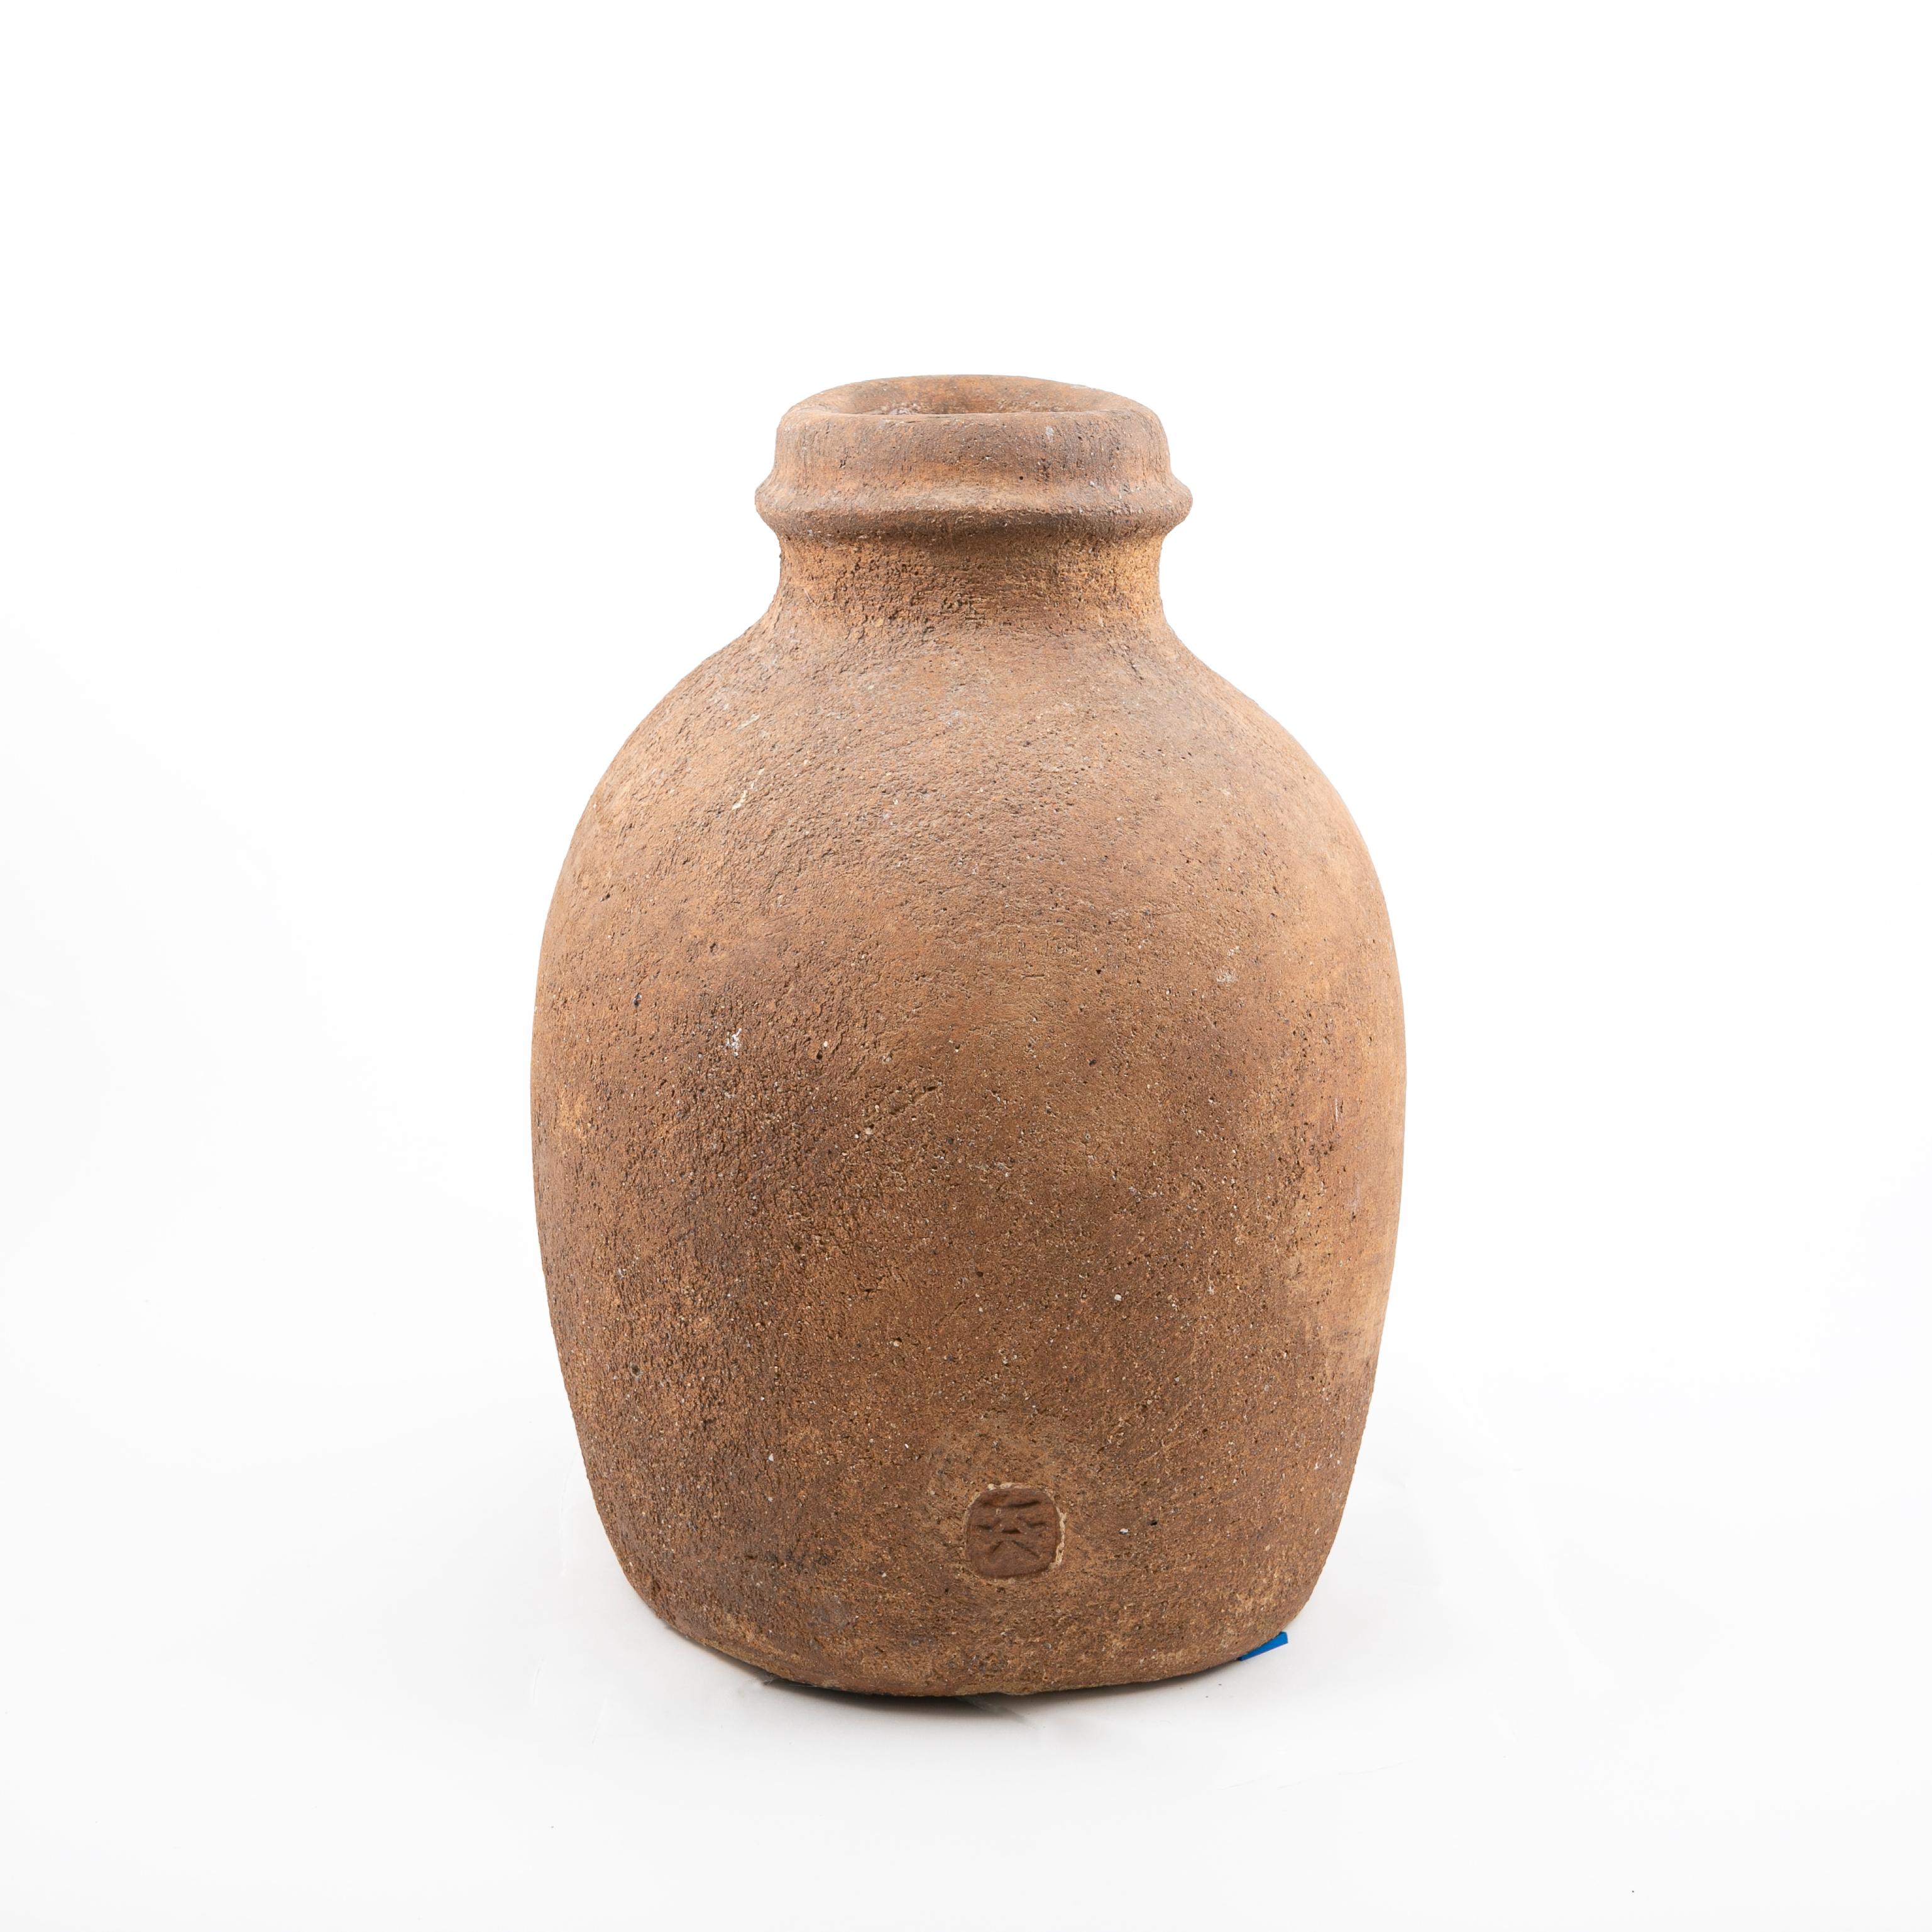 Large monumental stoneware vase made by Jens Andreasen in his own workshop in Copenhagen, Denmark in the 1950s.

Signed with artist logo 